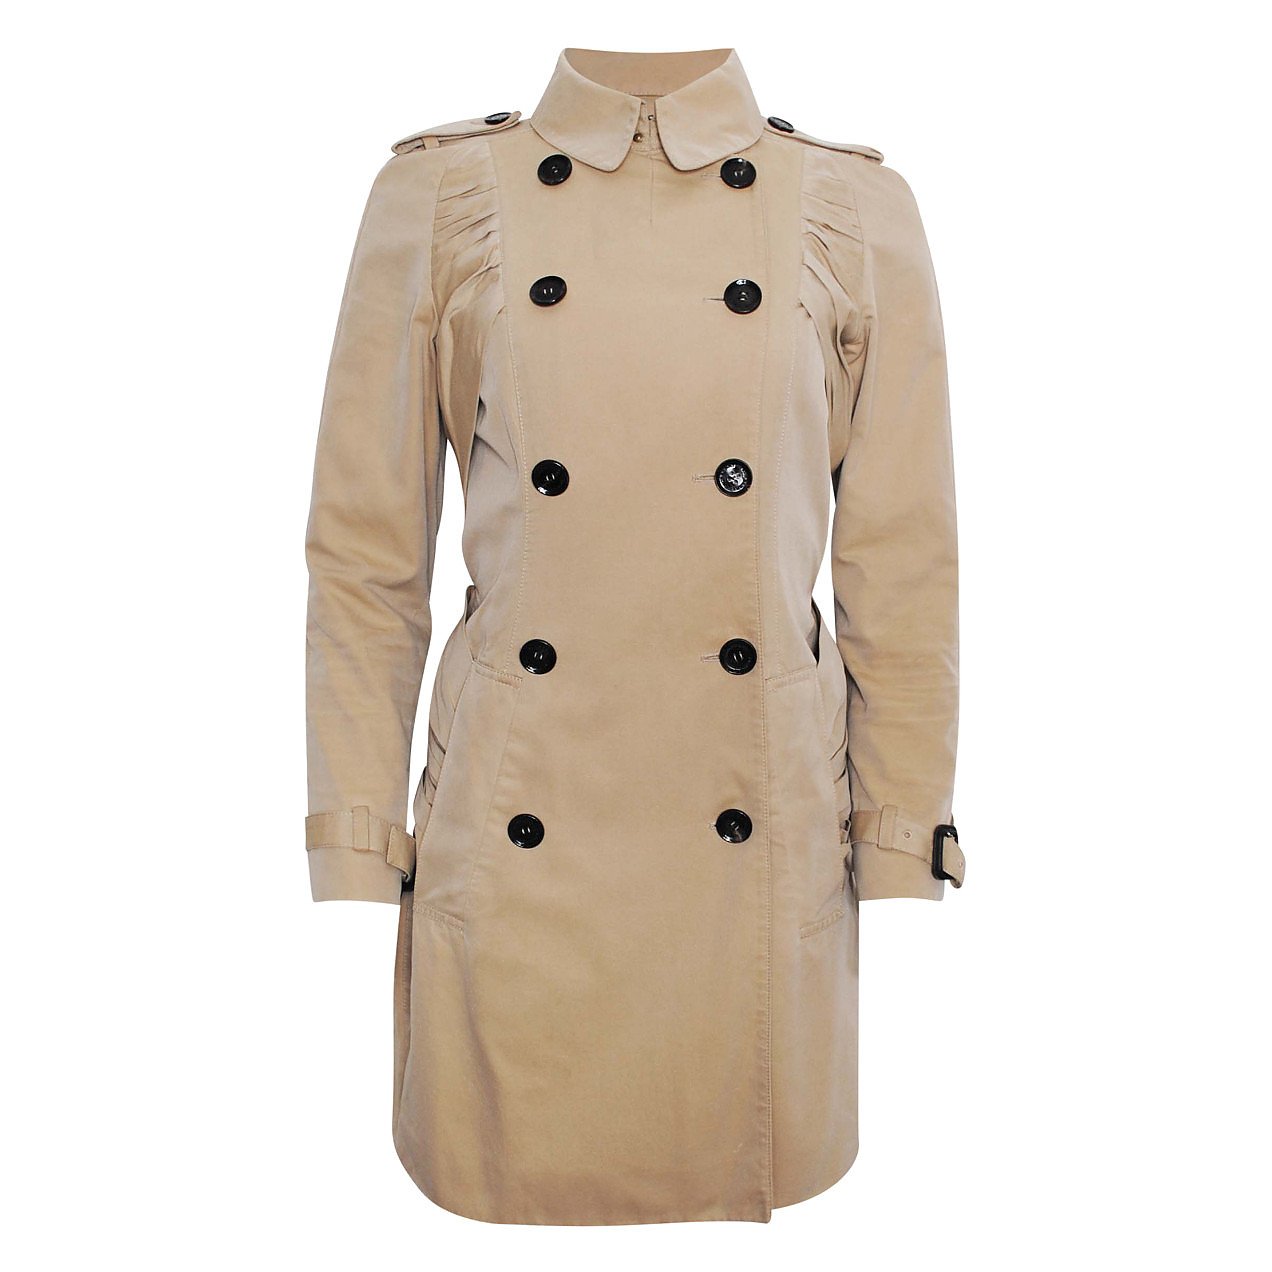 Burberry Trench Coat With Back Detailing